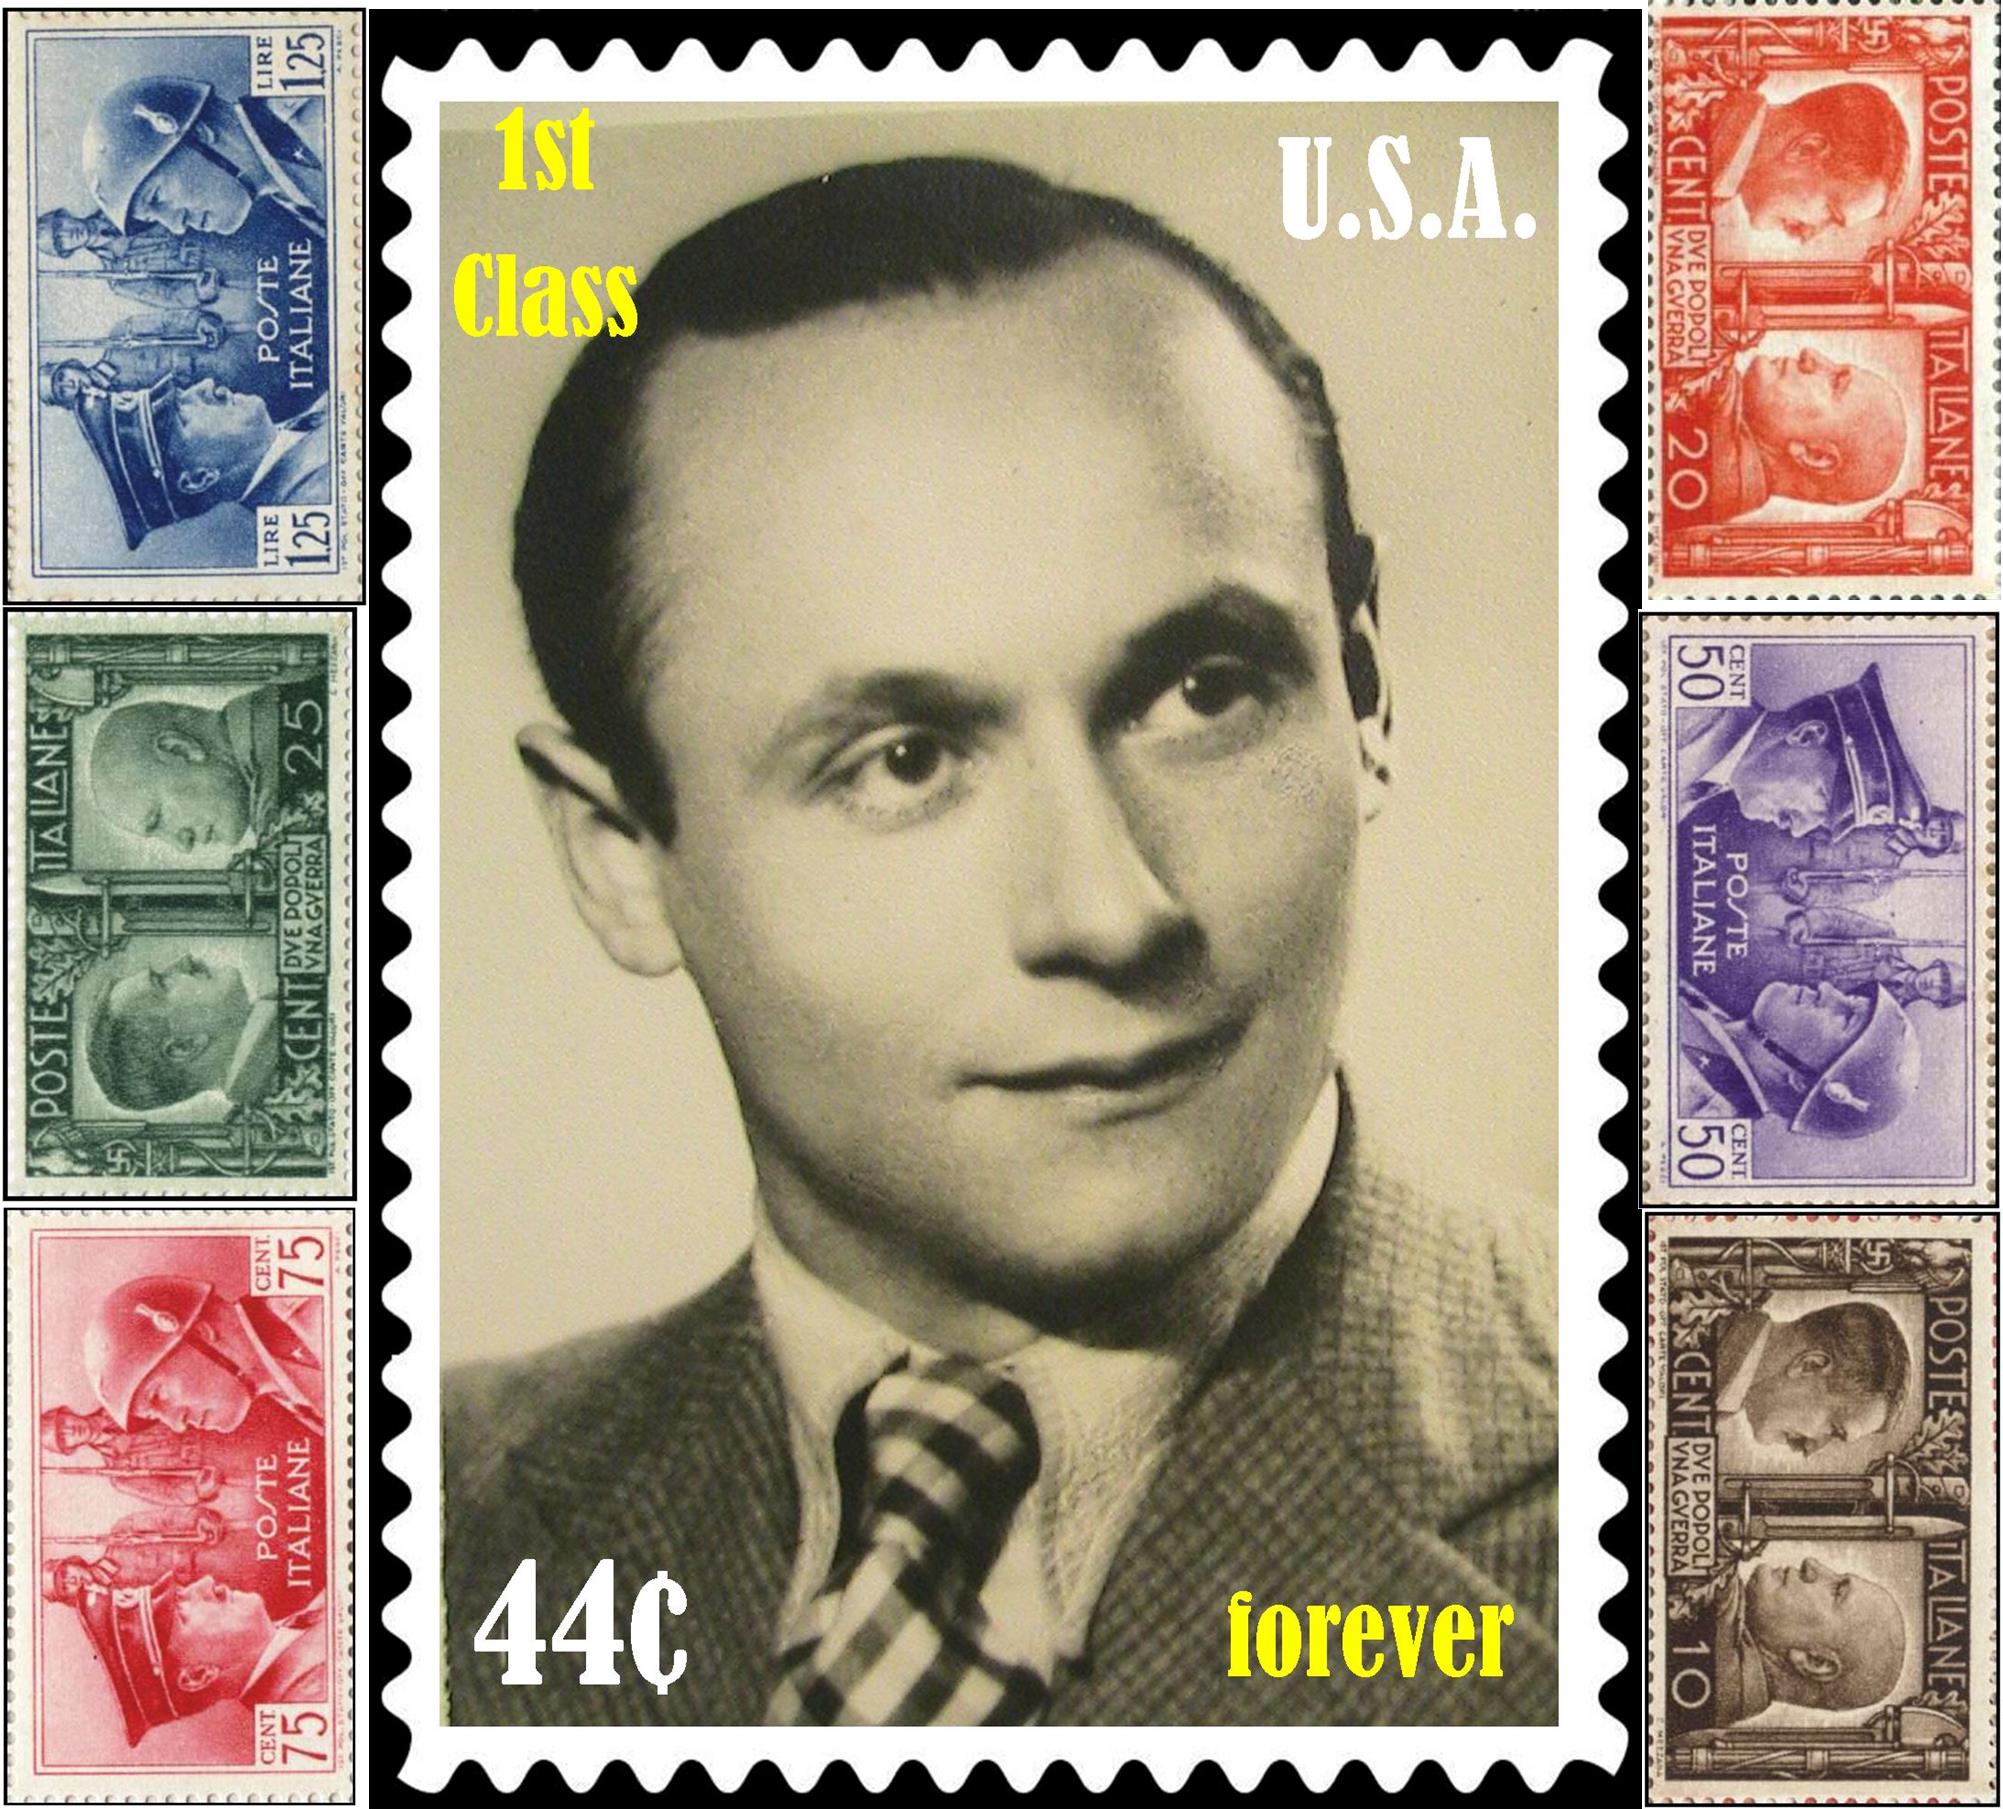 This is Victor Perantoni. He was an Italian born and raised in Poland, and lived Italy, Australia, and USA. He was one of the great stamp collectors of the 20th century, and then he died after having witnessed his century's fruit: 9/11/2001